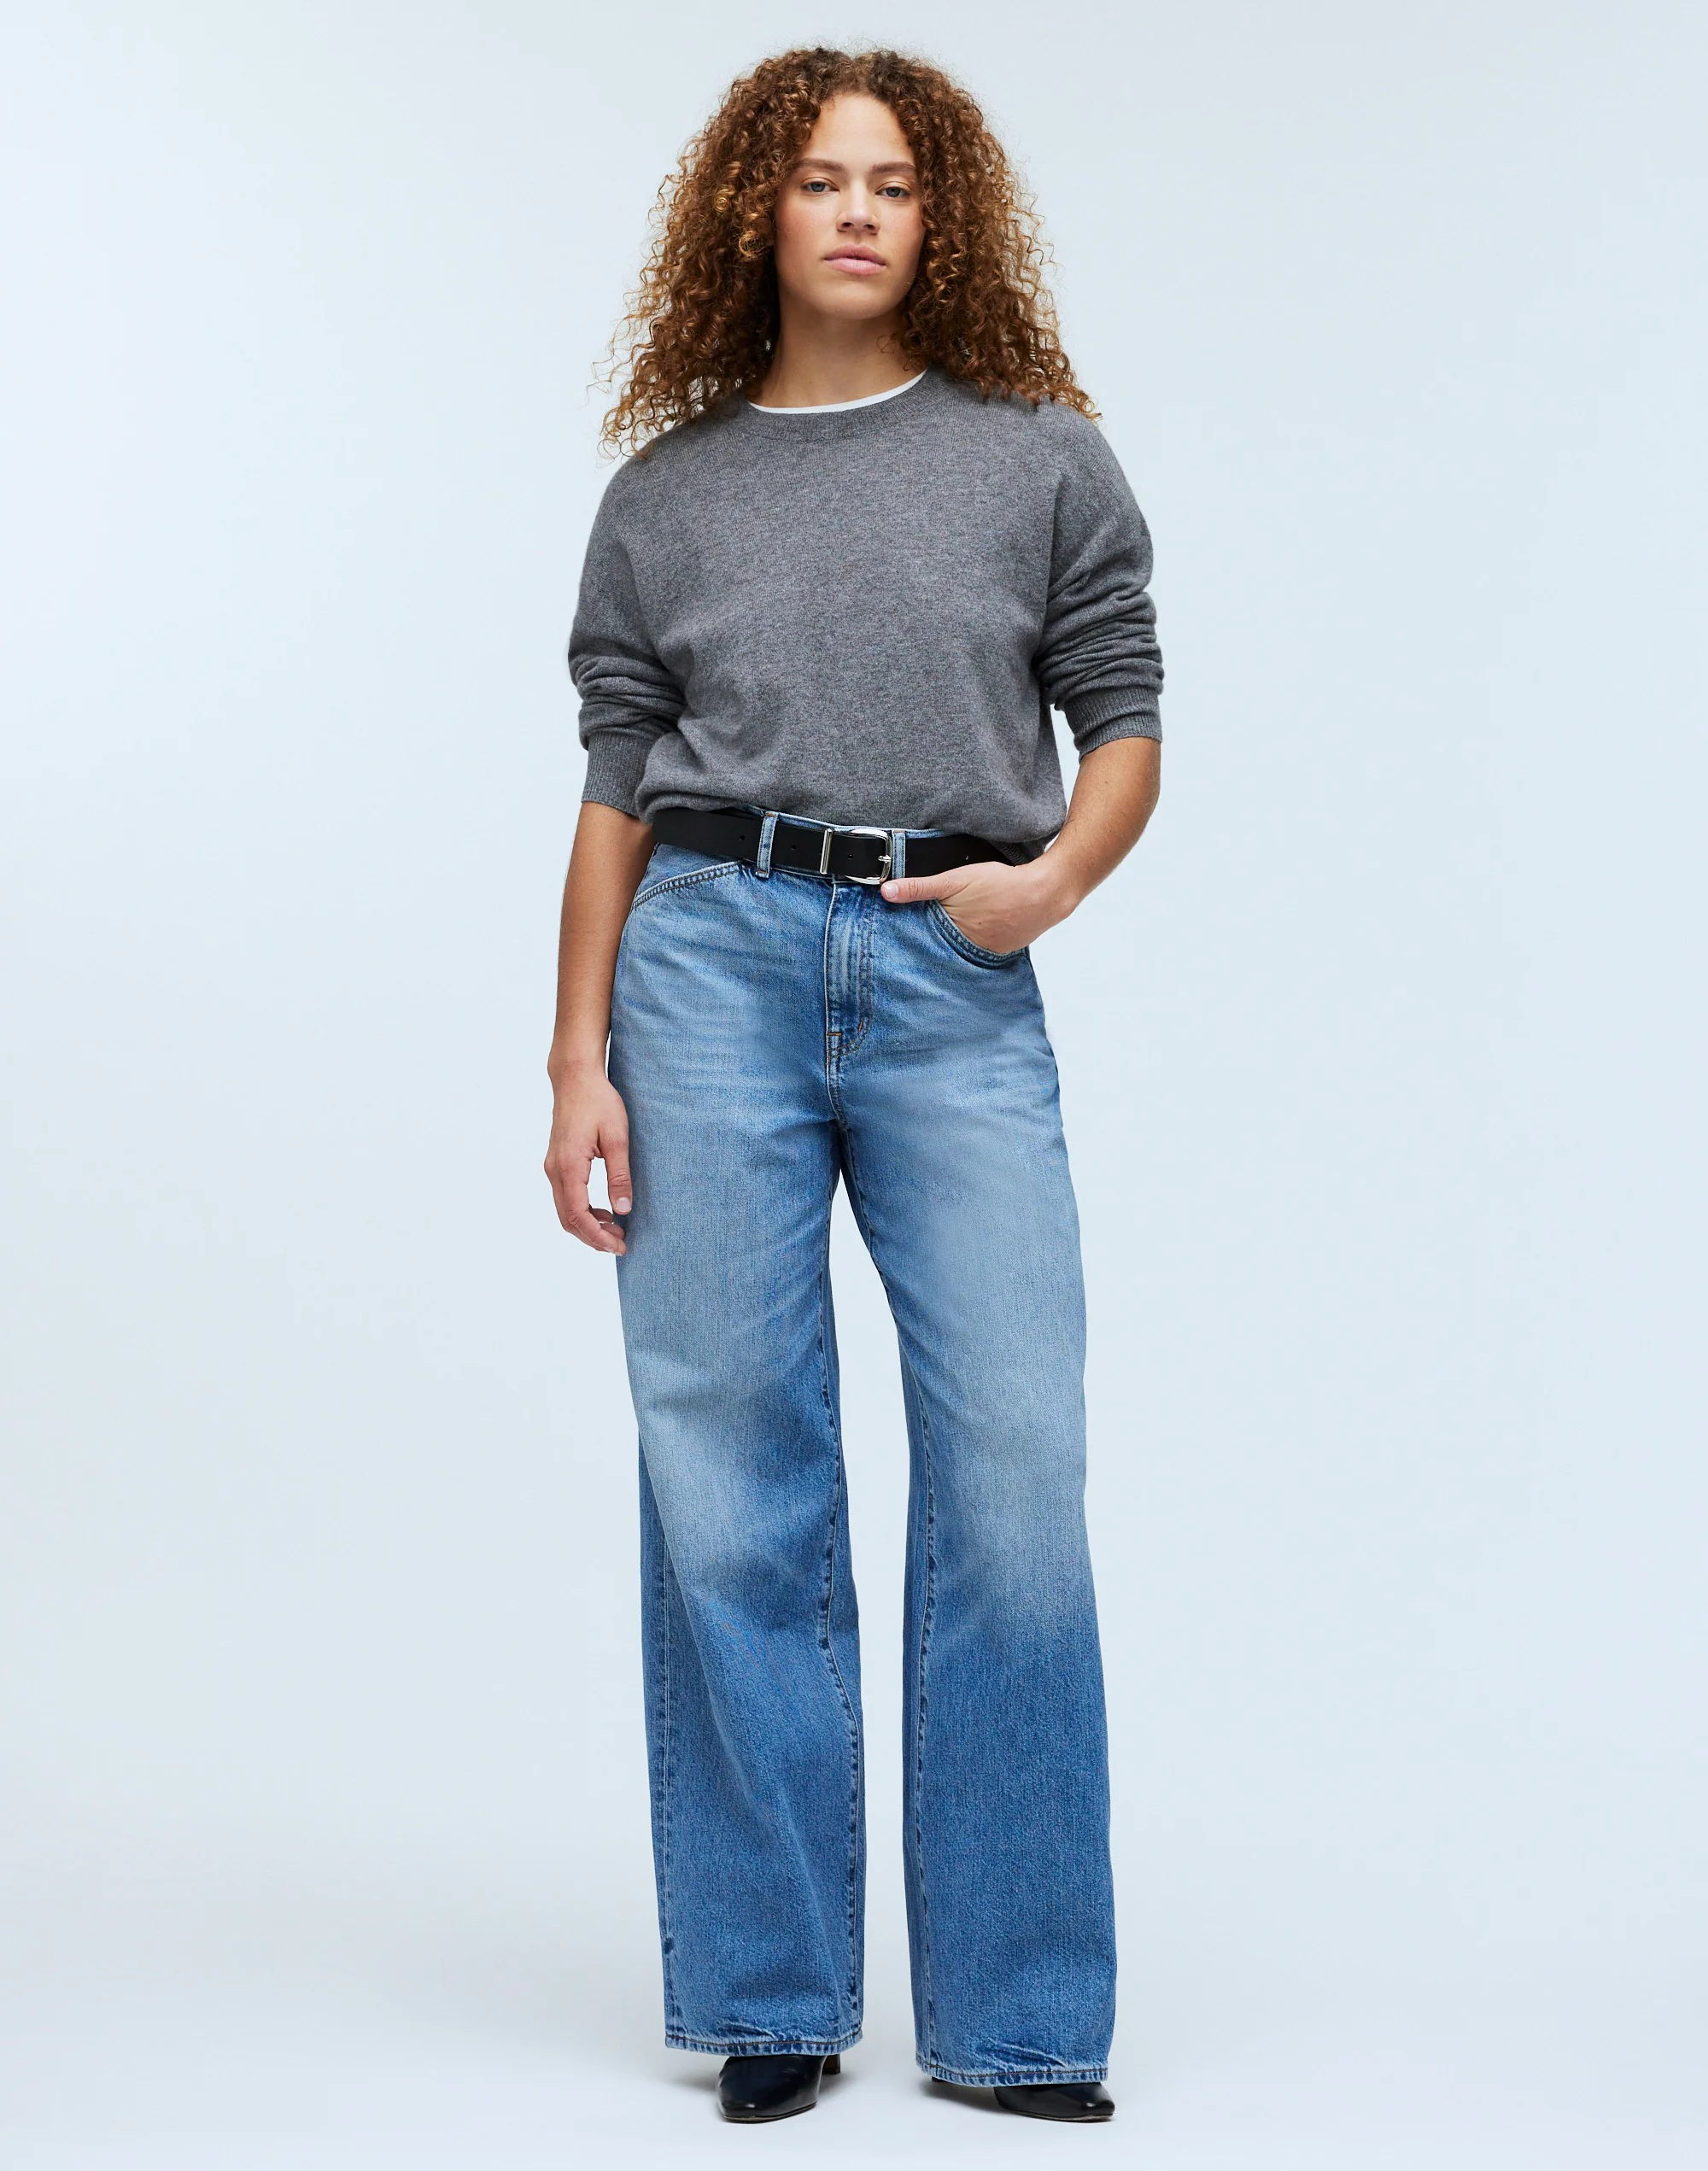 Madewell X Kaihara Superwide-Leg Jeans in Sanborn Wash